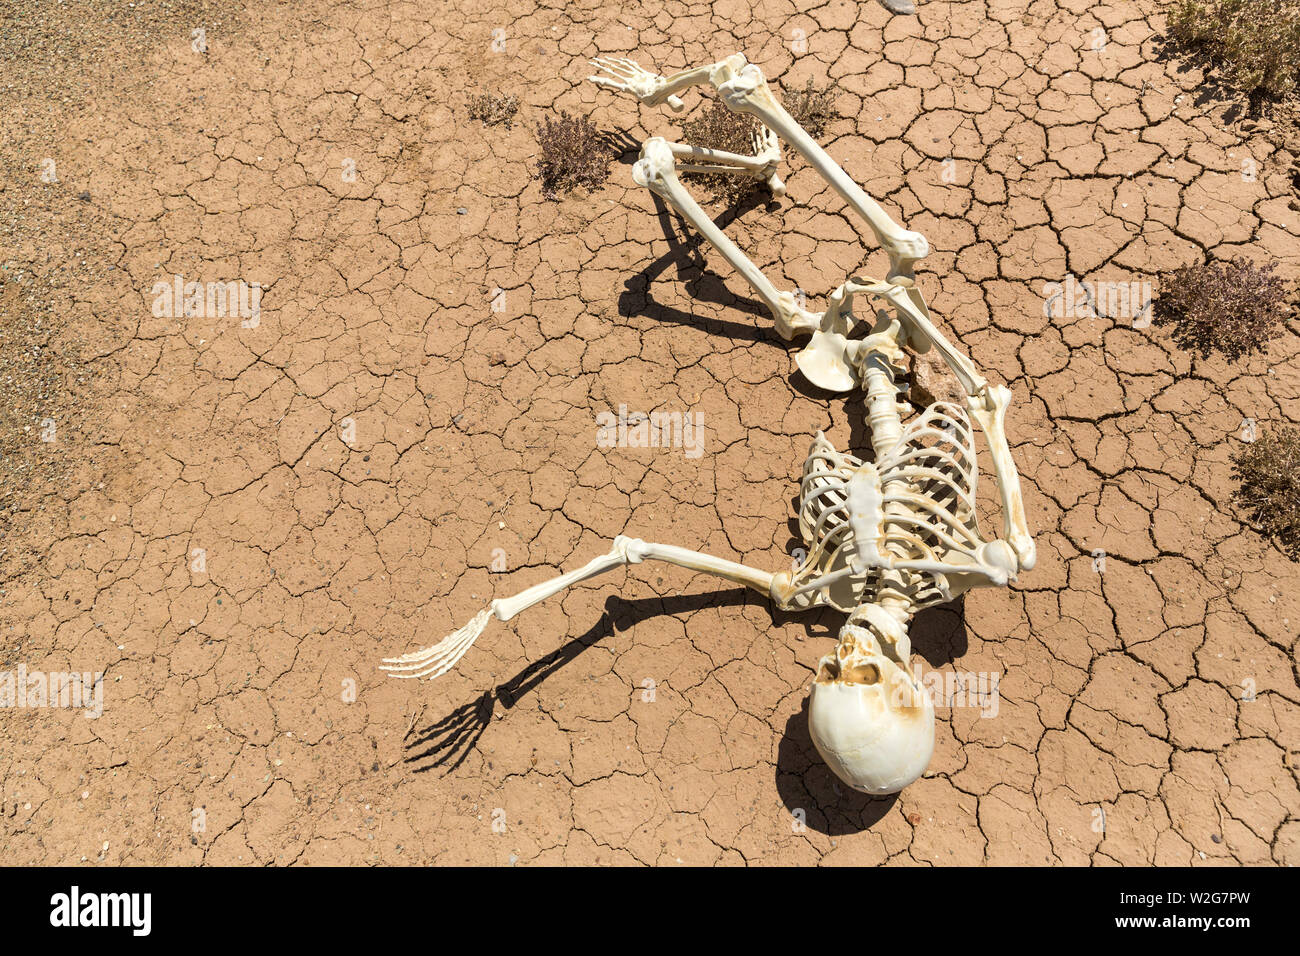 skeleton-parched-and-dead-of-thirst-on-cracked-mud-in-the-desert-W2G7PW.jpg